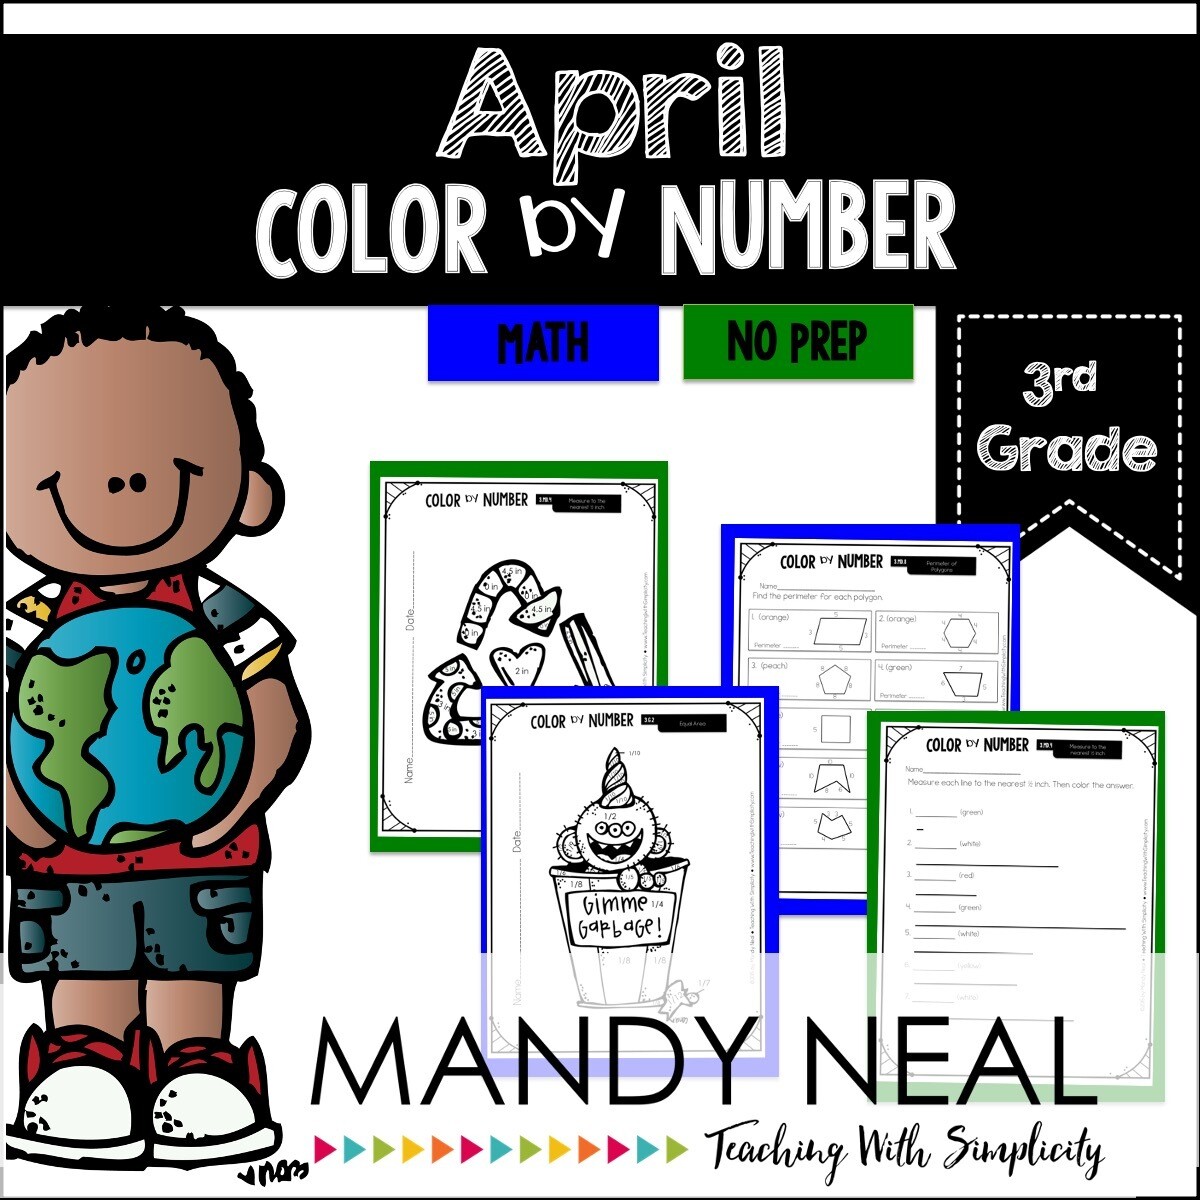 April Color By Number for 3rd Grade Math